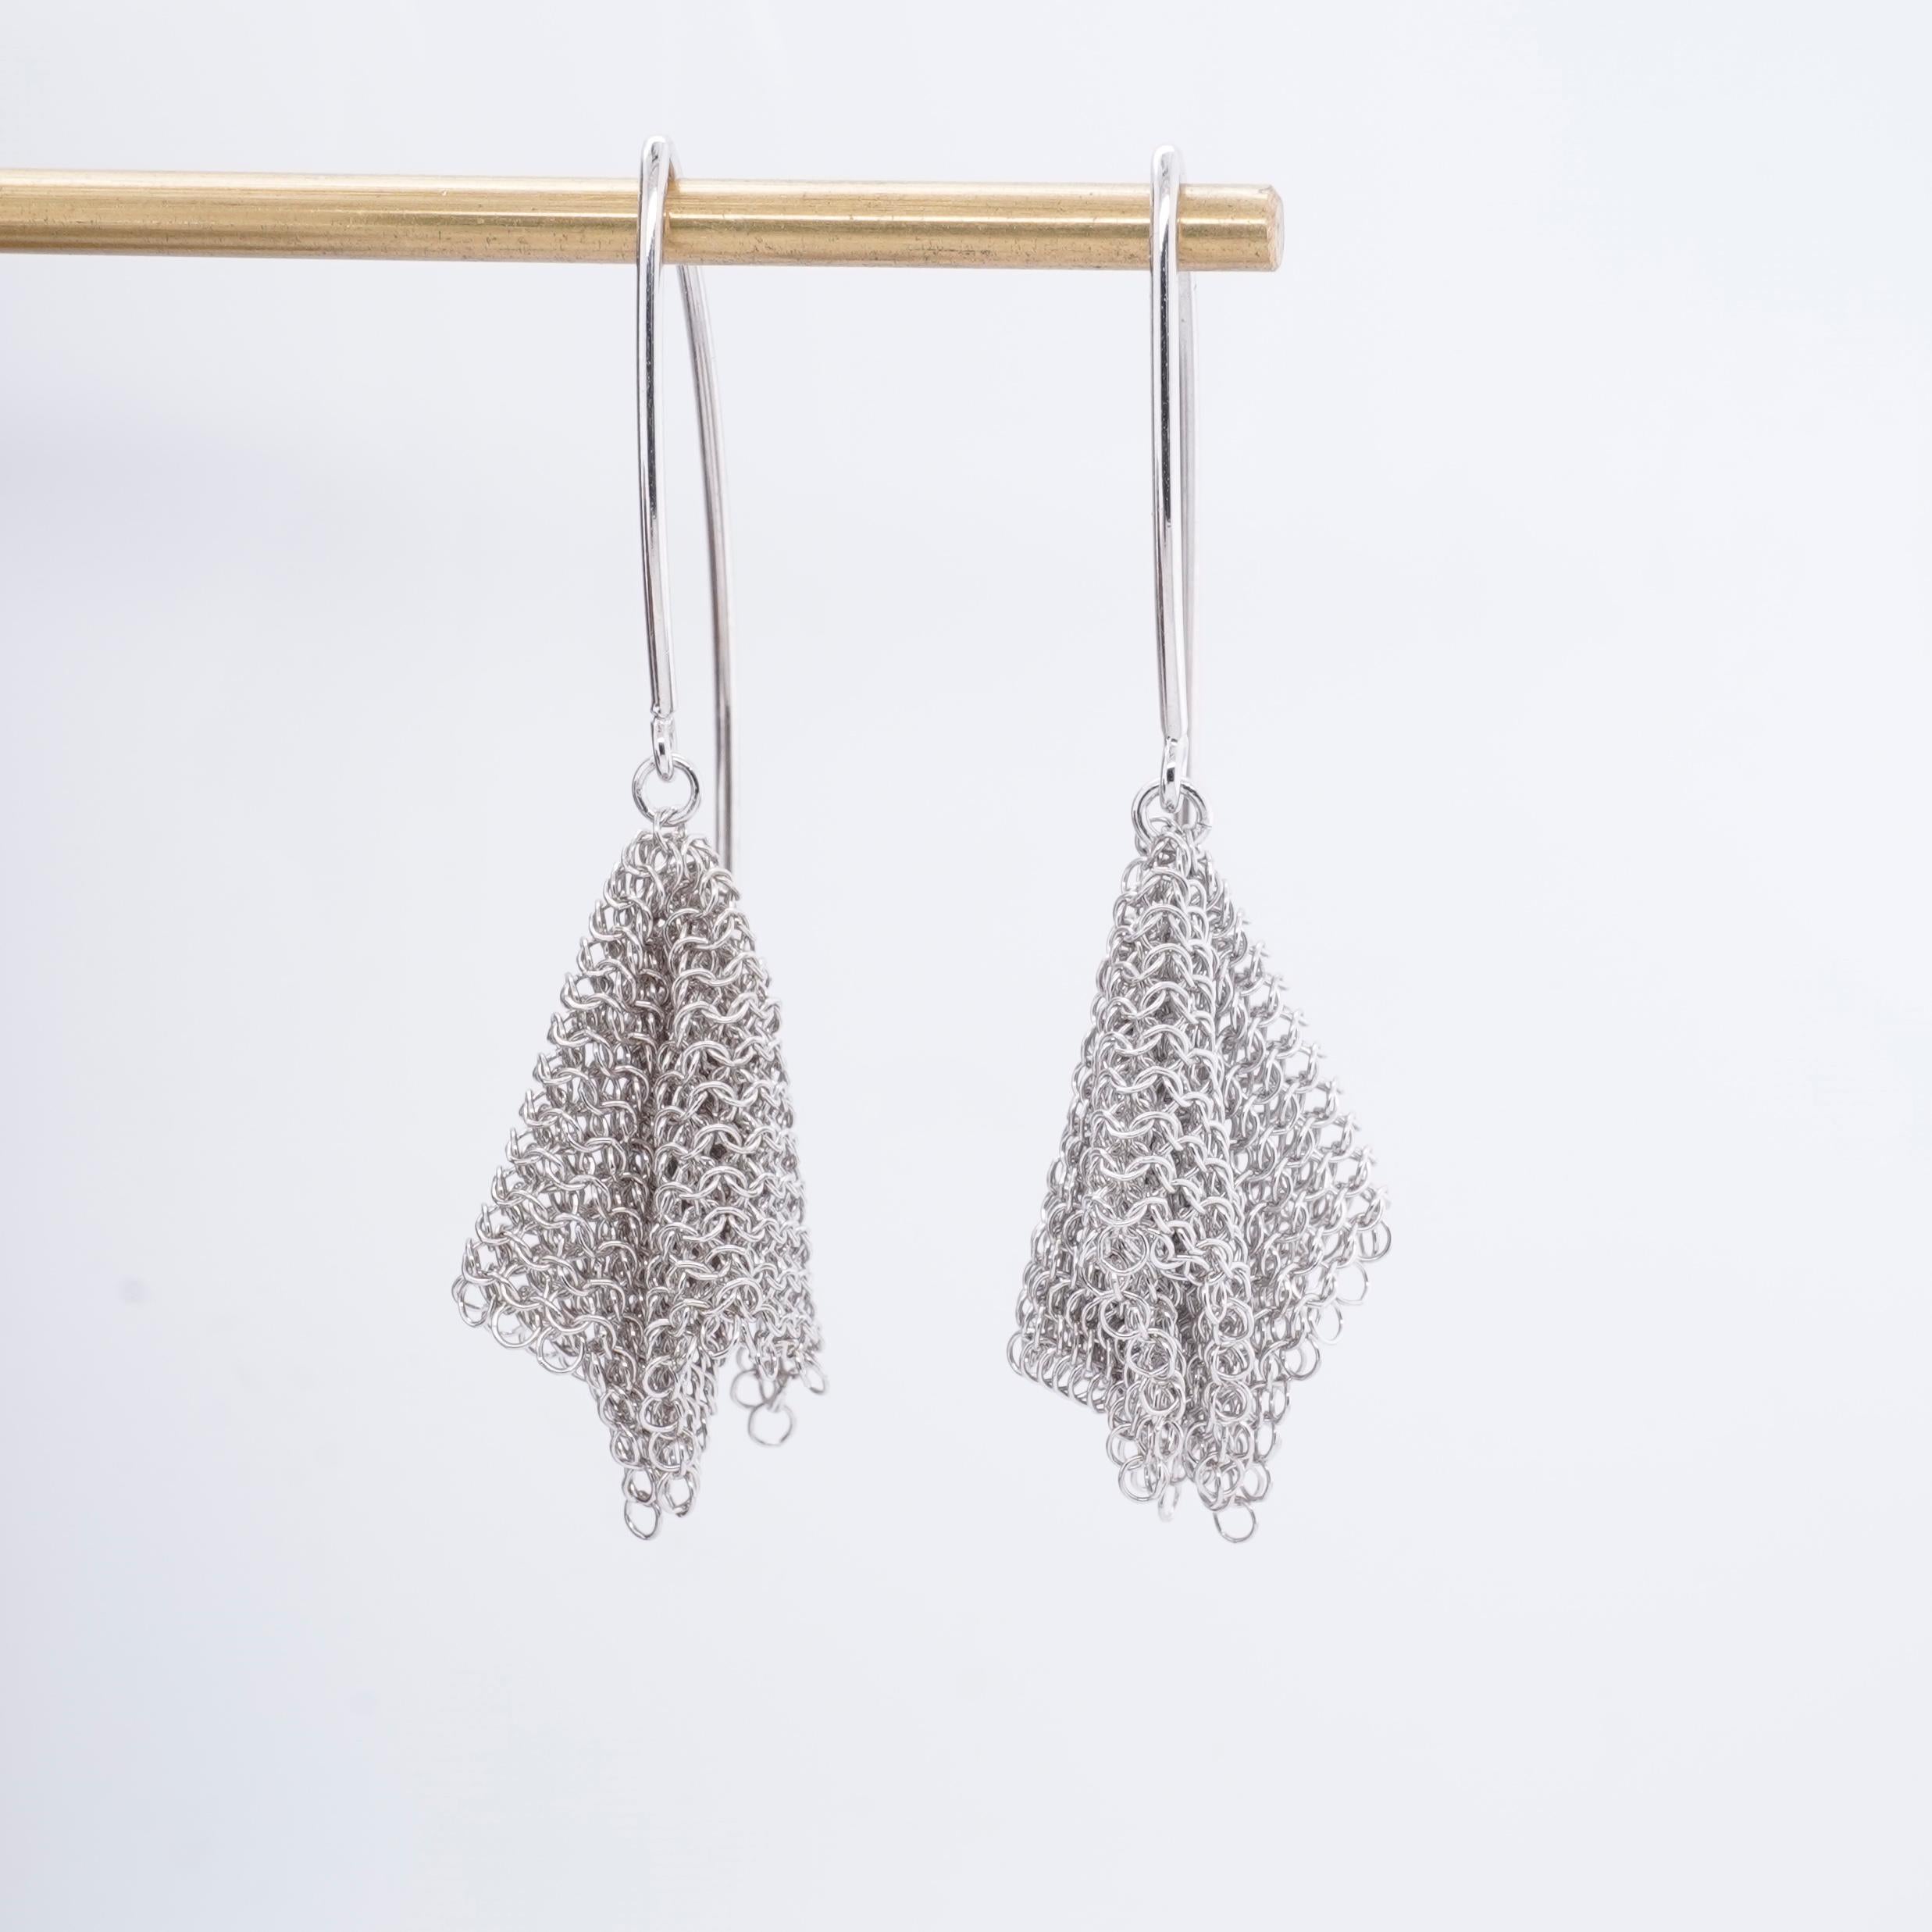 Sterling Silver Rhodium Plate Fine Chainmaille Mesh Earrings by Ashley Childs
Sculpted from vintage chainmeille mesh 1920's purses. (Reclaimed recycled materials.) Lovely drape and movement to these earrings. Rhodium vermeil sterling silver measures